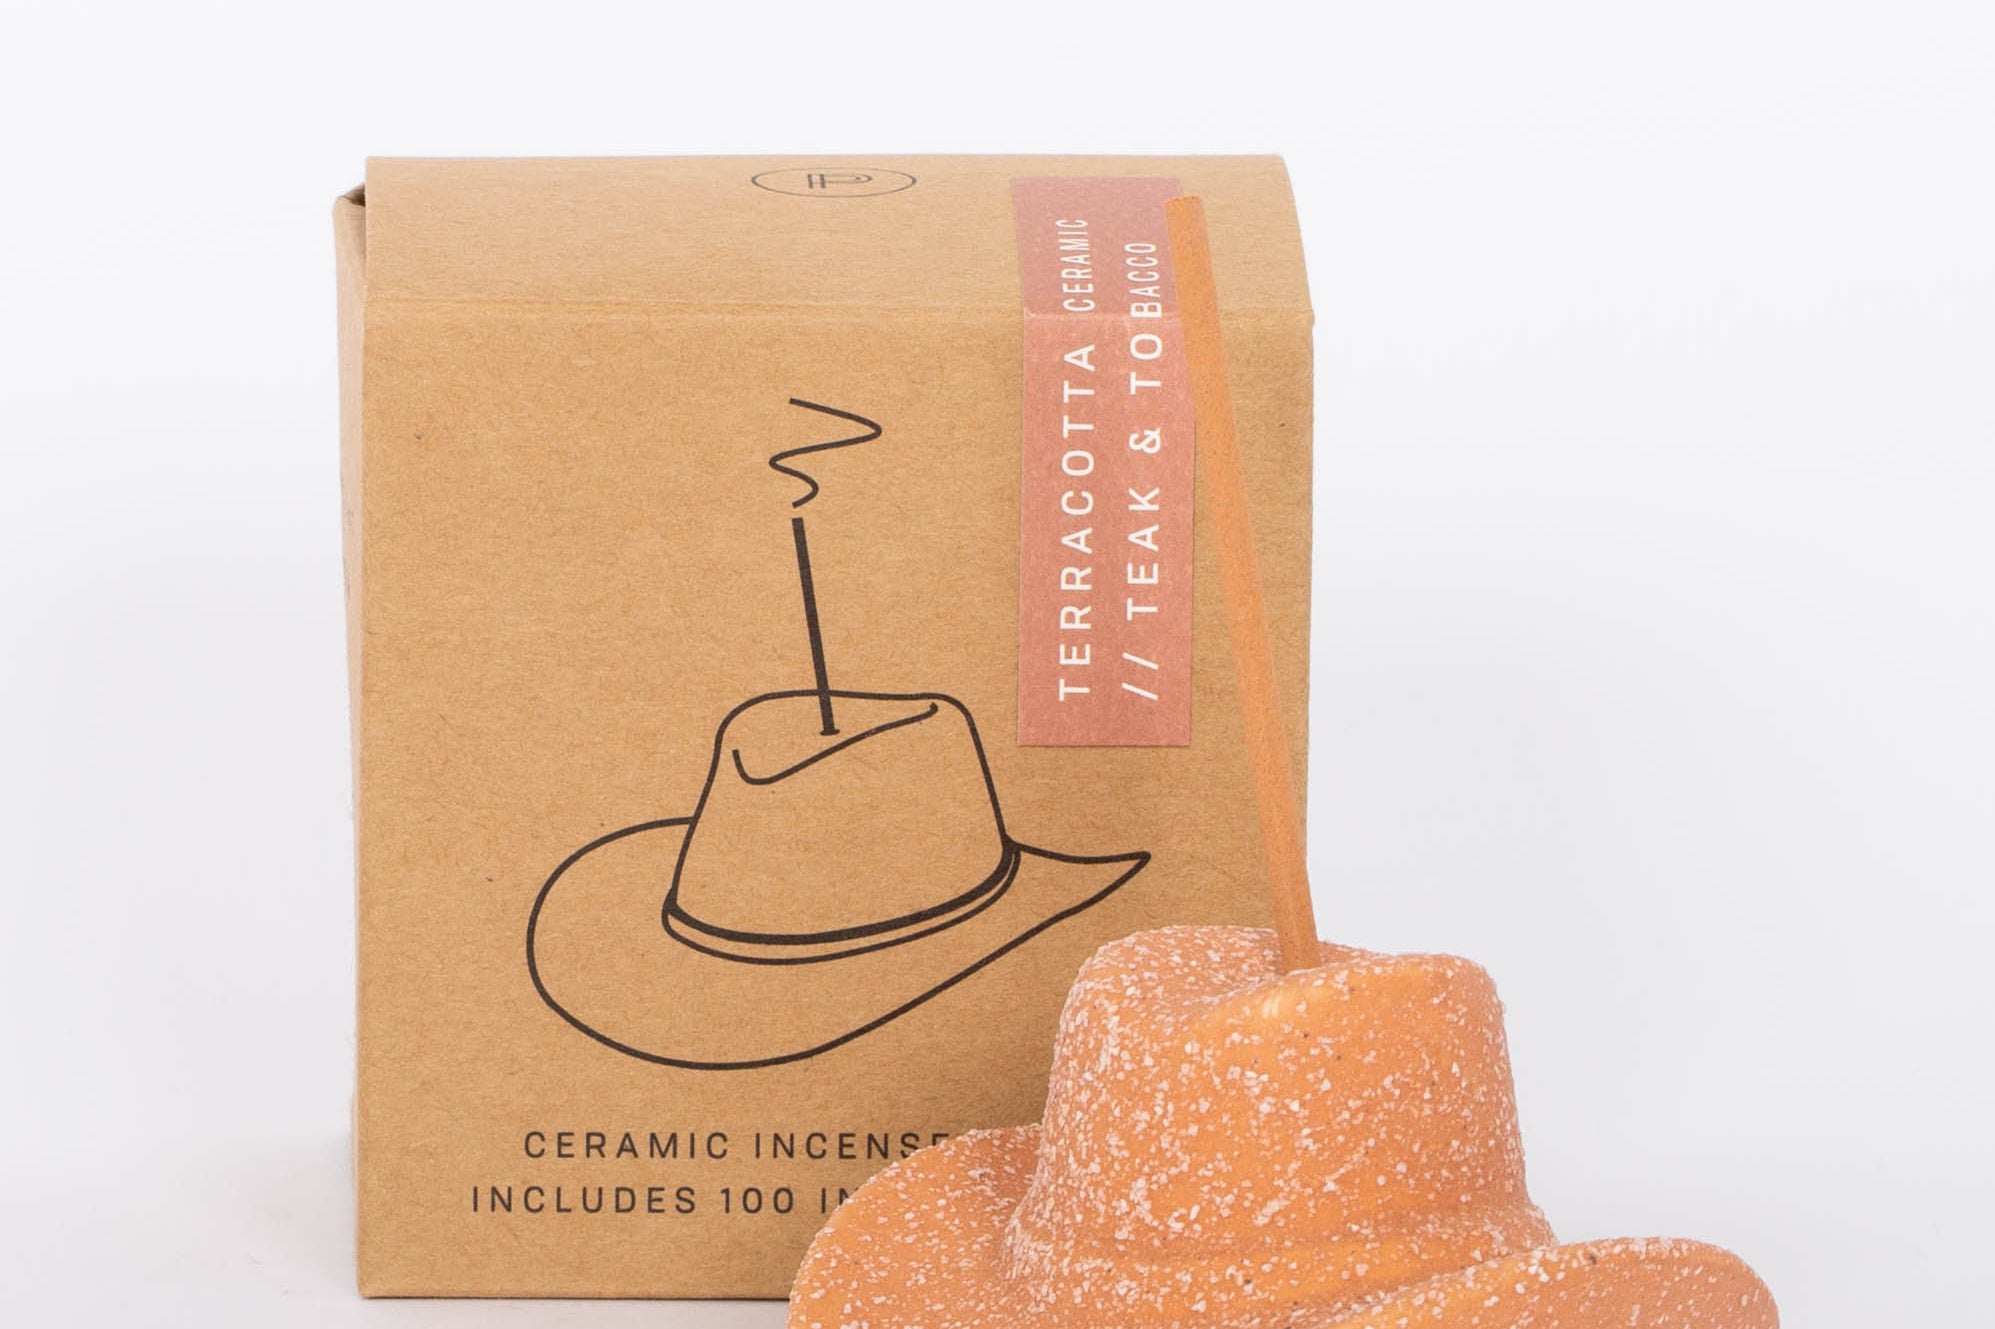 Terracotta Cowboy Hat Incense Holder This vintage-inspired incense burner is on of our favorites! Including 100 fragrant incense sticks of Palo Santo Suede, this ceramic incense holder will keep your space burning with ambiance and fragrant tones.